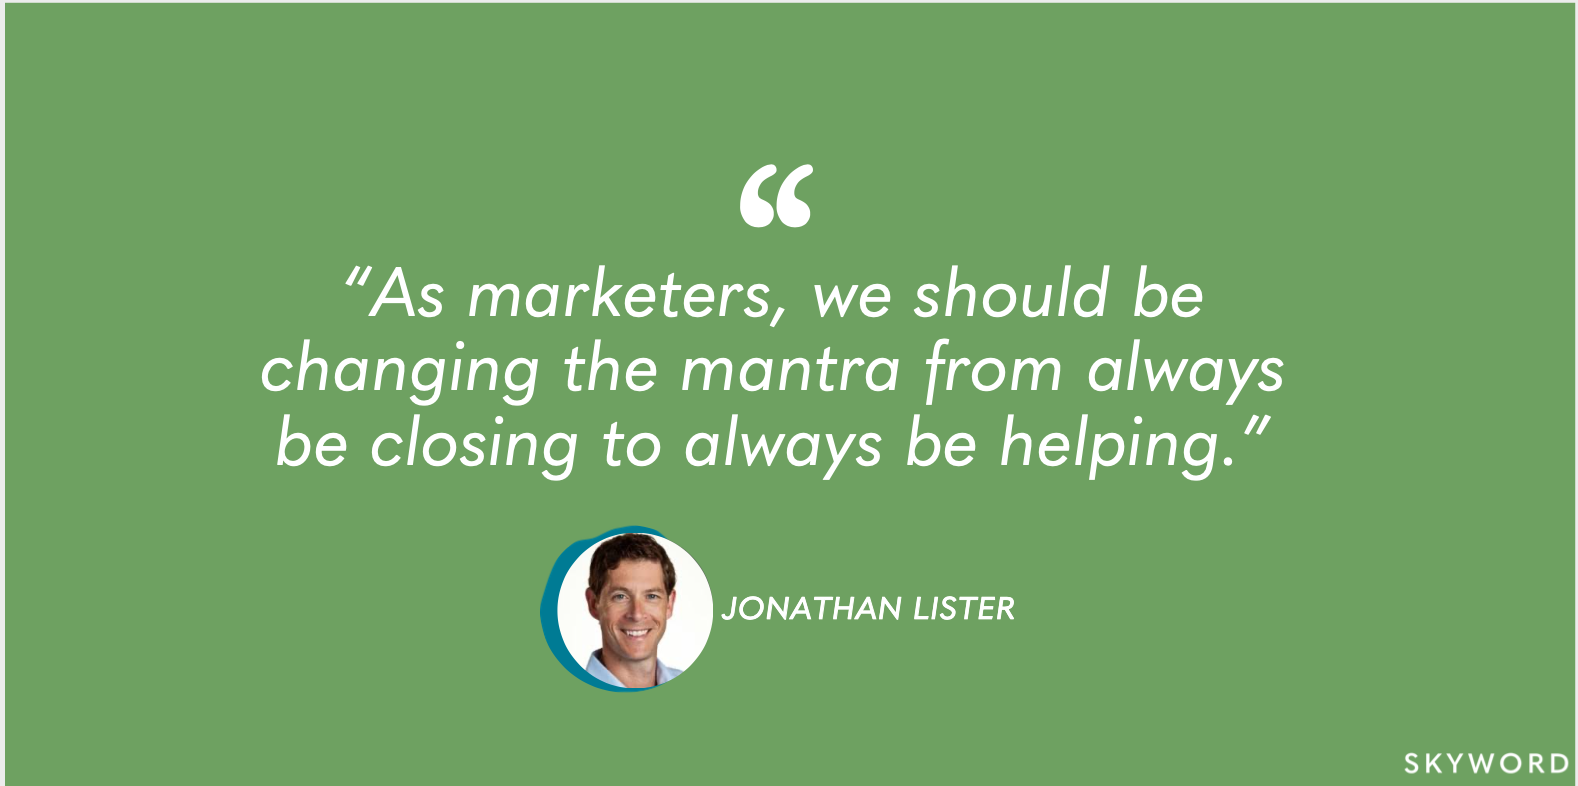 jonathan lister marketing strategy quote